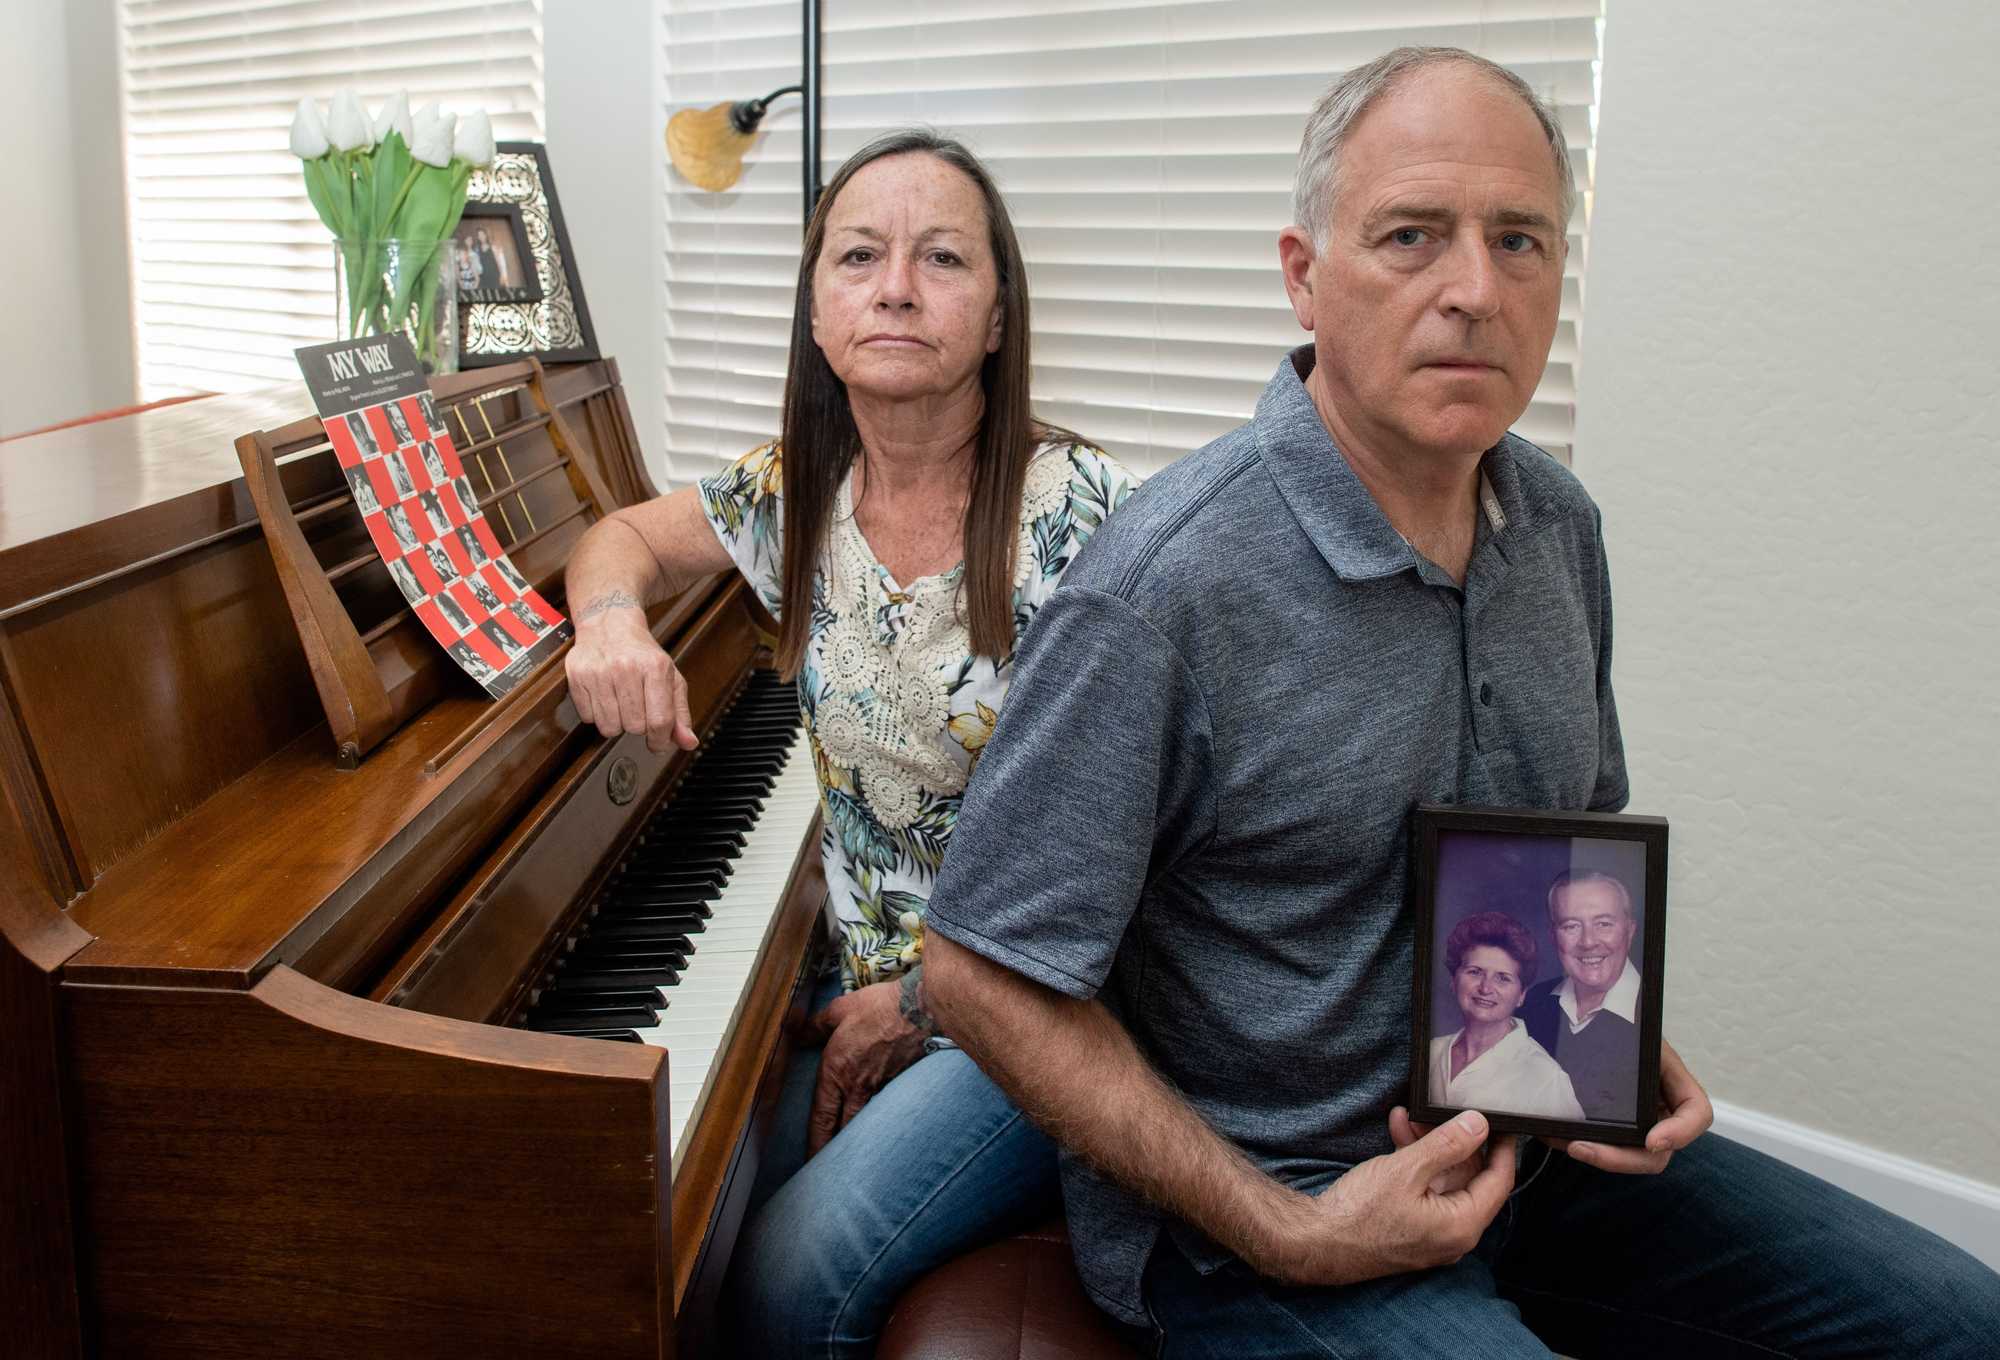 Suzanne Tiscione's and Michael Garland's father, Warren Garland of Derry, N.H., never fully recovered after surgery performed by Dr. Yvon Baribeau. He died in 1996. Their family is believed to have filed the first malpractice lawsuit against Baribeau in his quarter-century at Catholic Medical Center.